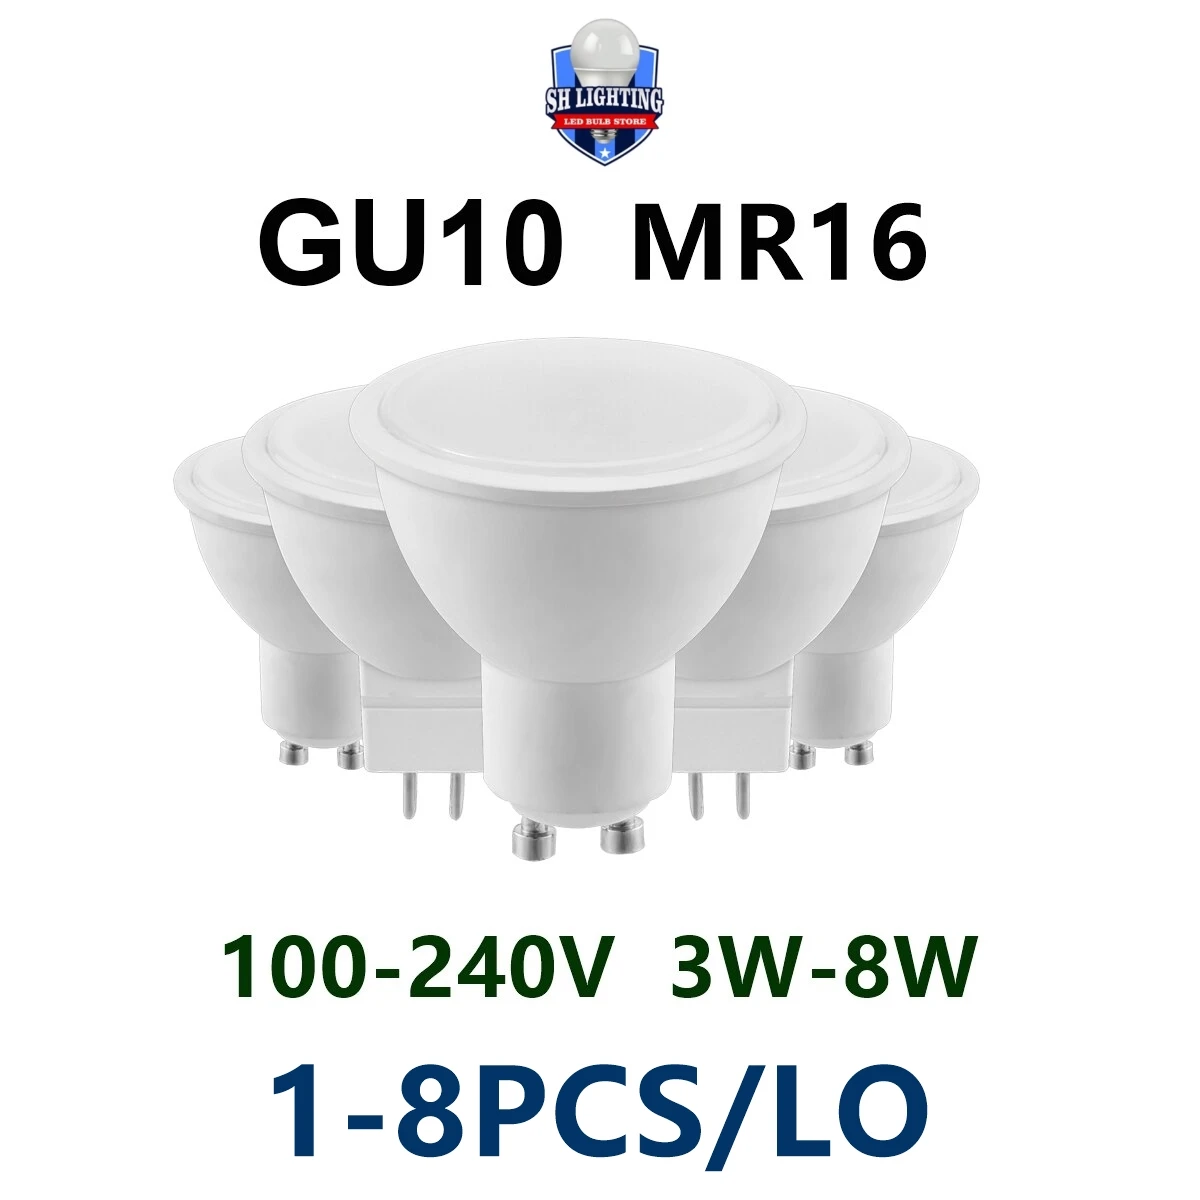 

LED spotlight GU10 MR16 100-240V 3W-8W high bright warm white light replacement 50W 100W halogen lamp is suitable for kitchen